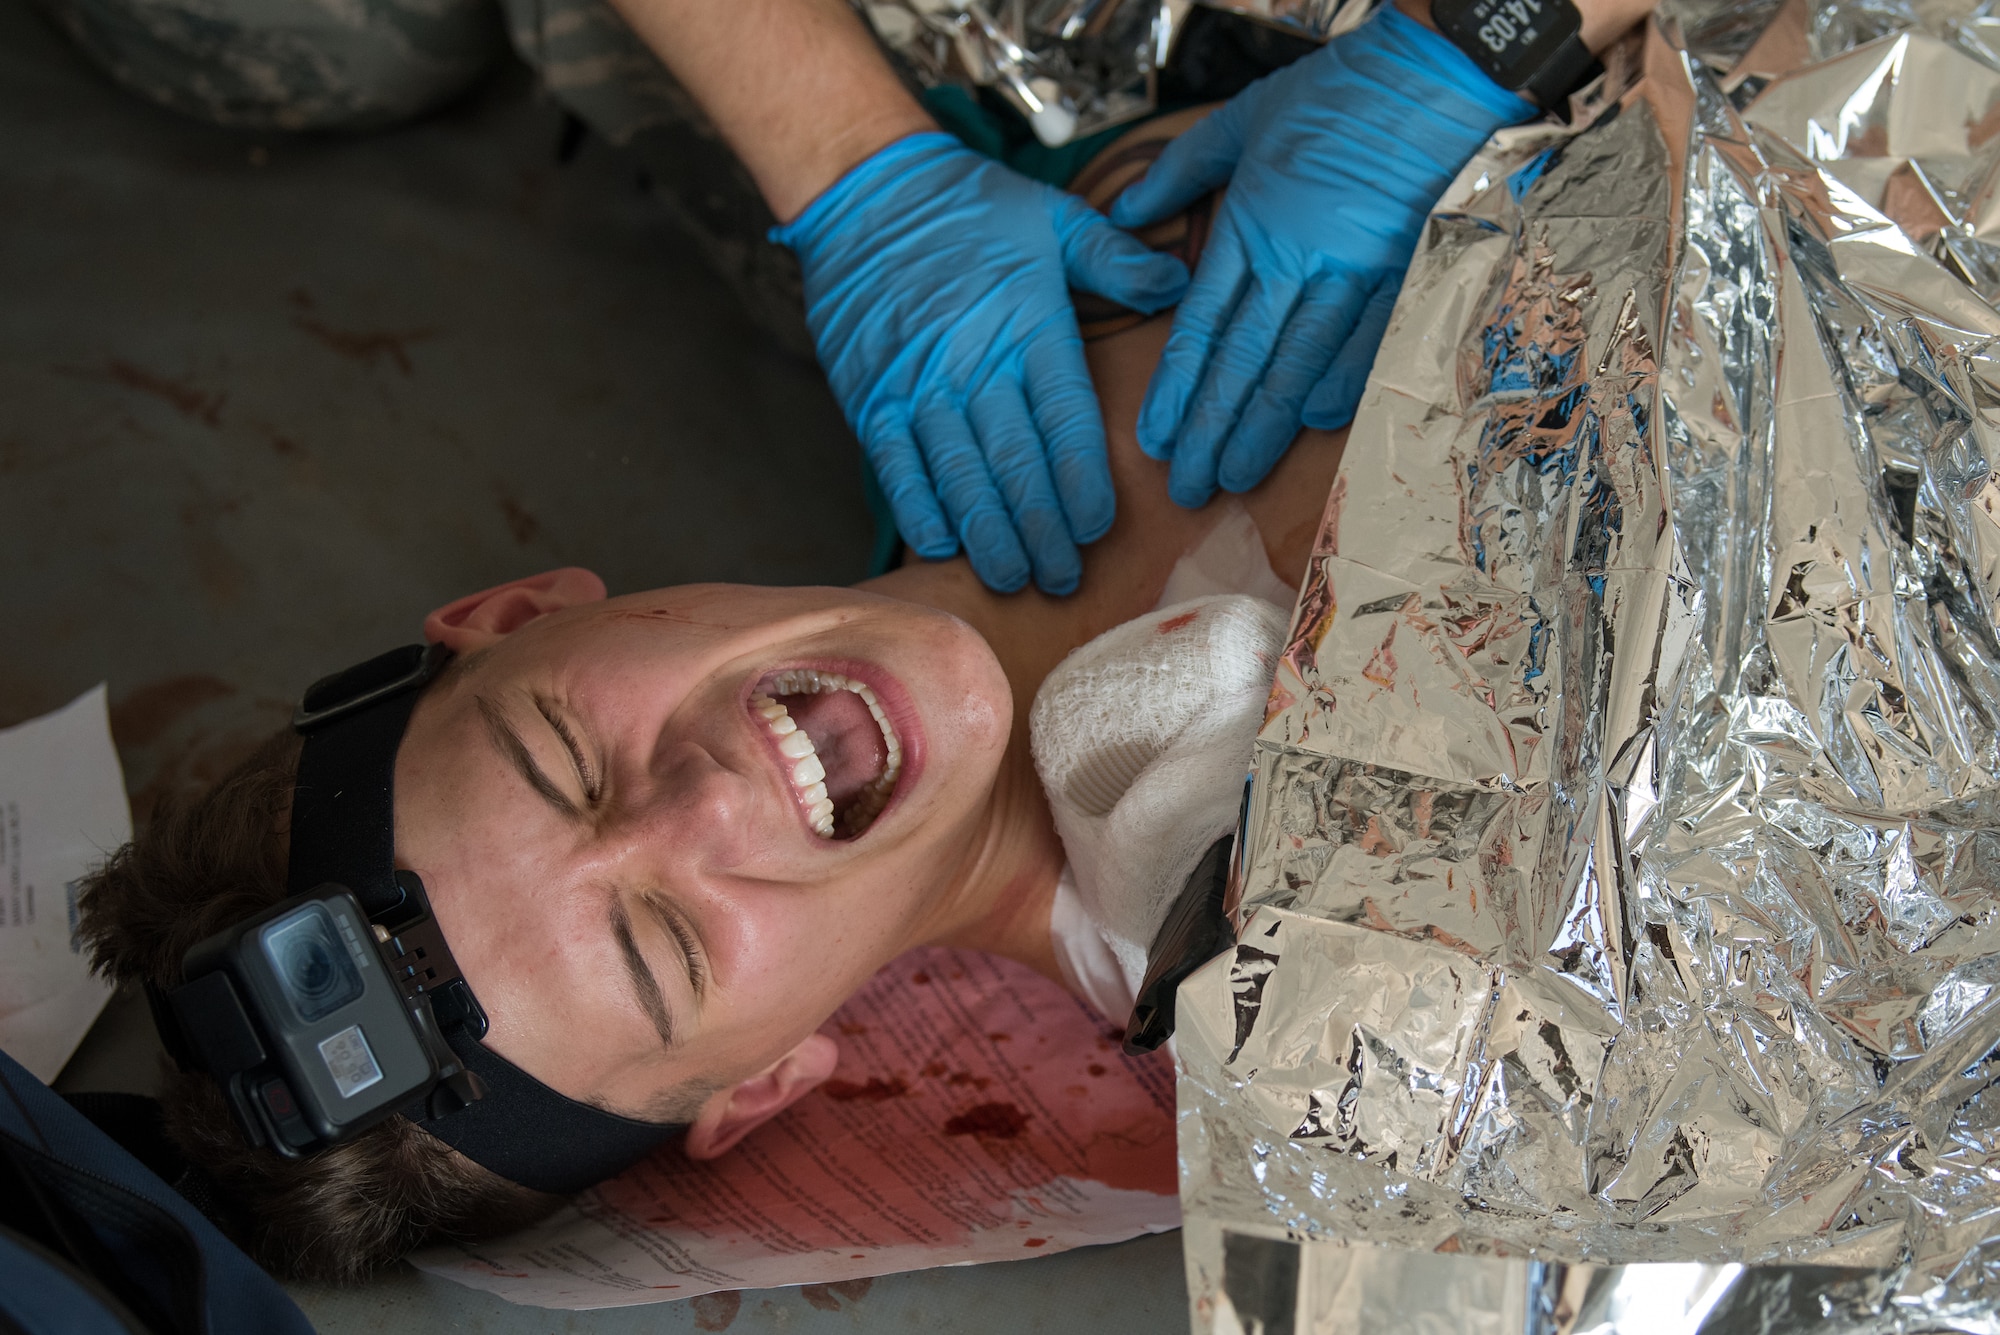 Airman 1st Class Dustin Stainback, 551st Special Operations Squadron special missions aviator, yells out in pain due to a knife in his shoulder during a scenario at the 2019 Medic Rodeo at Cannon Air Force Base, N.M., Sept. 18, 2019. The Medic Rodeo is designed to test the skills of air force medical technicians in both deployed and home installation environments. (U.S. Air Force photo by Staff Sgt. Michael Washburn)